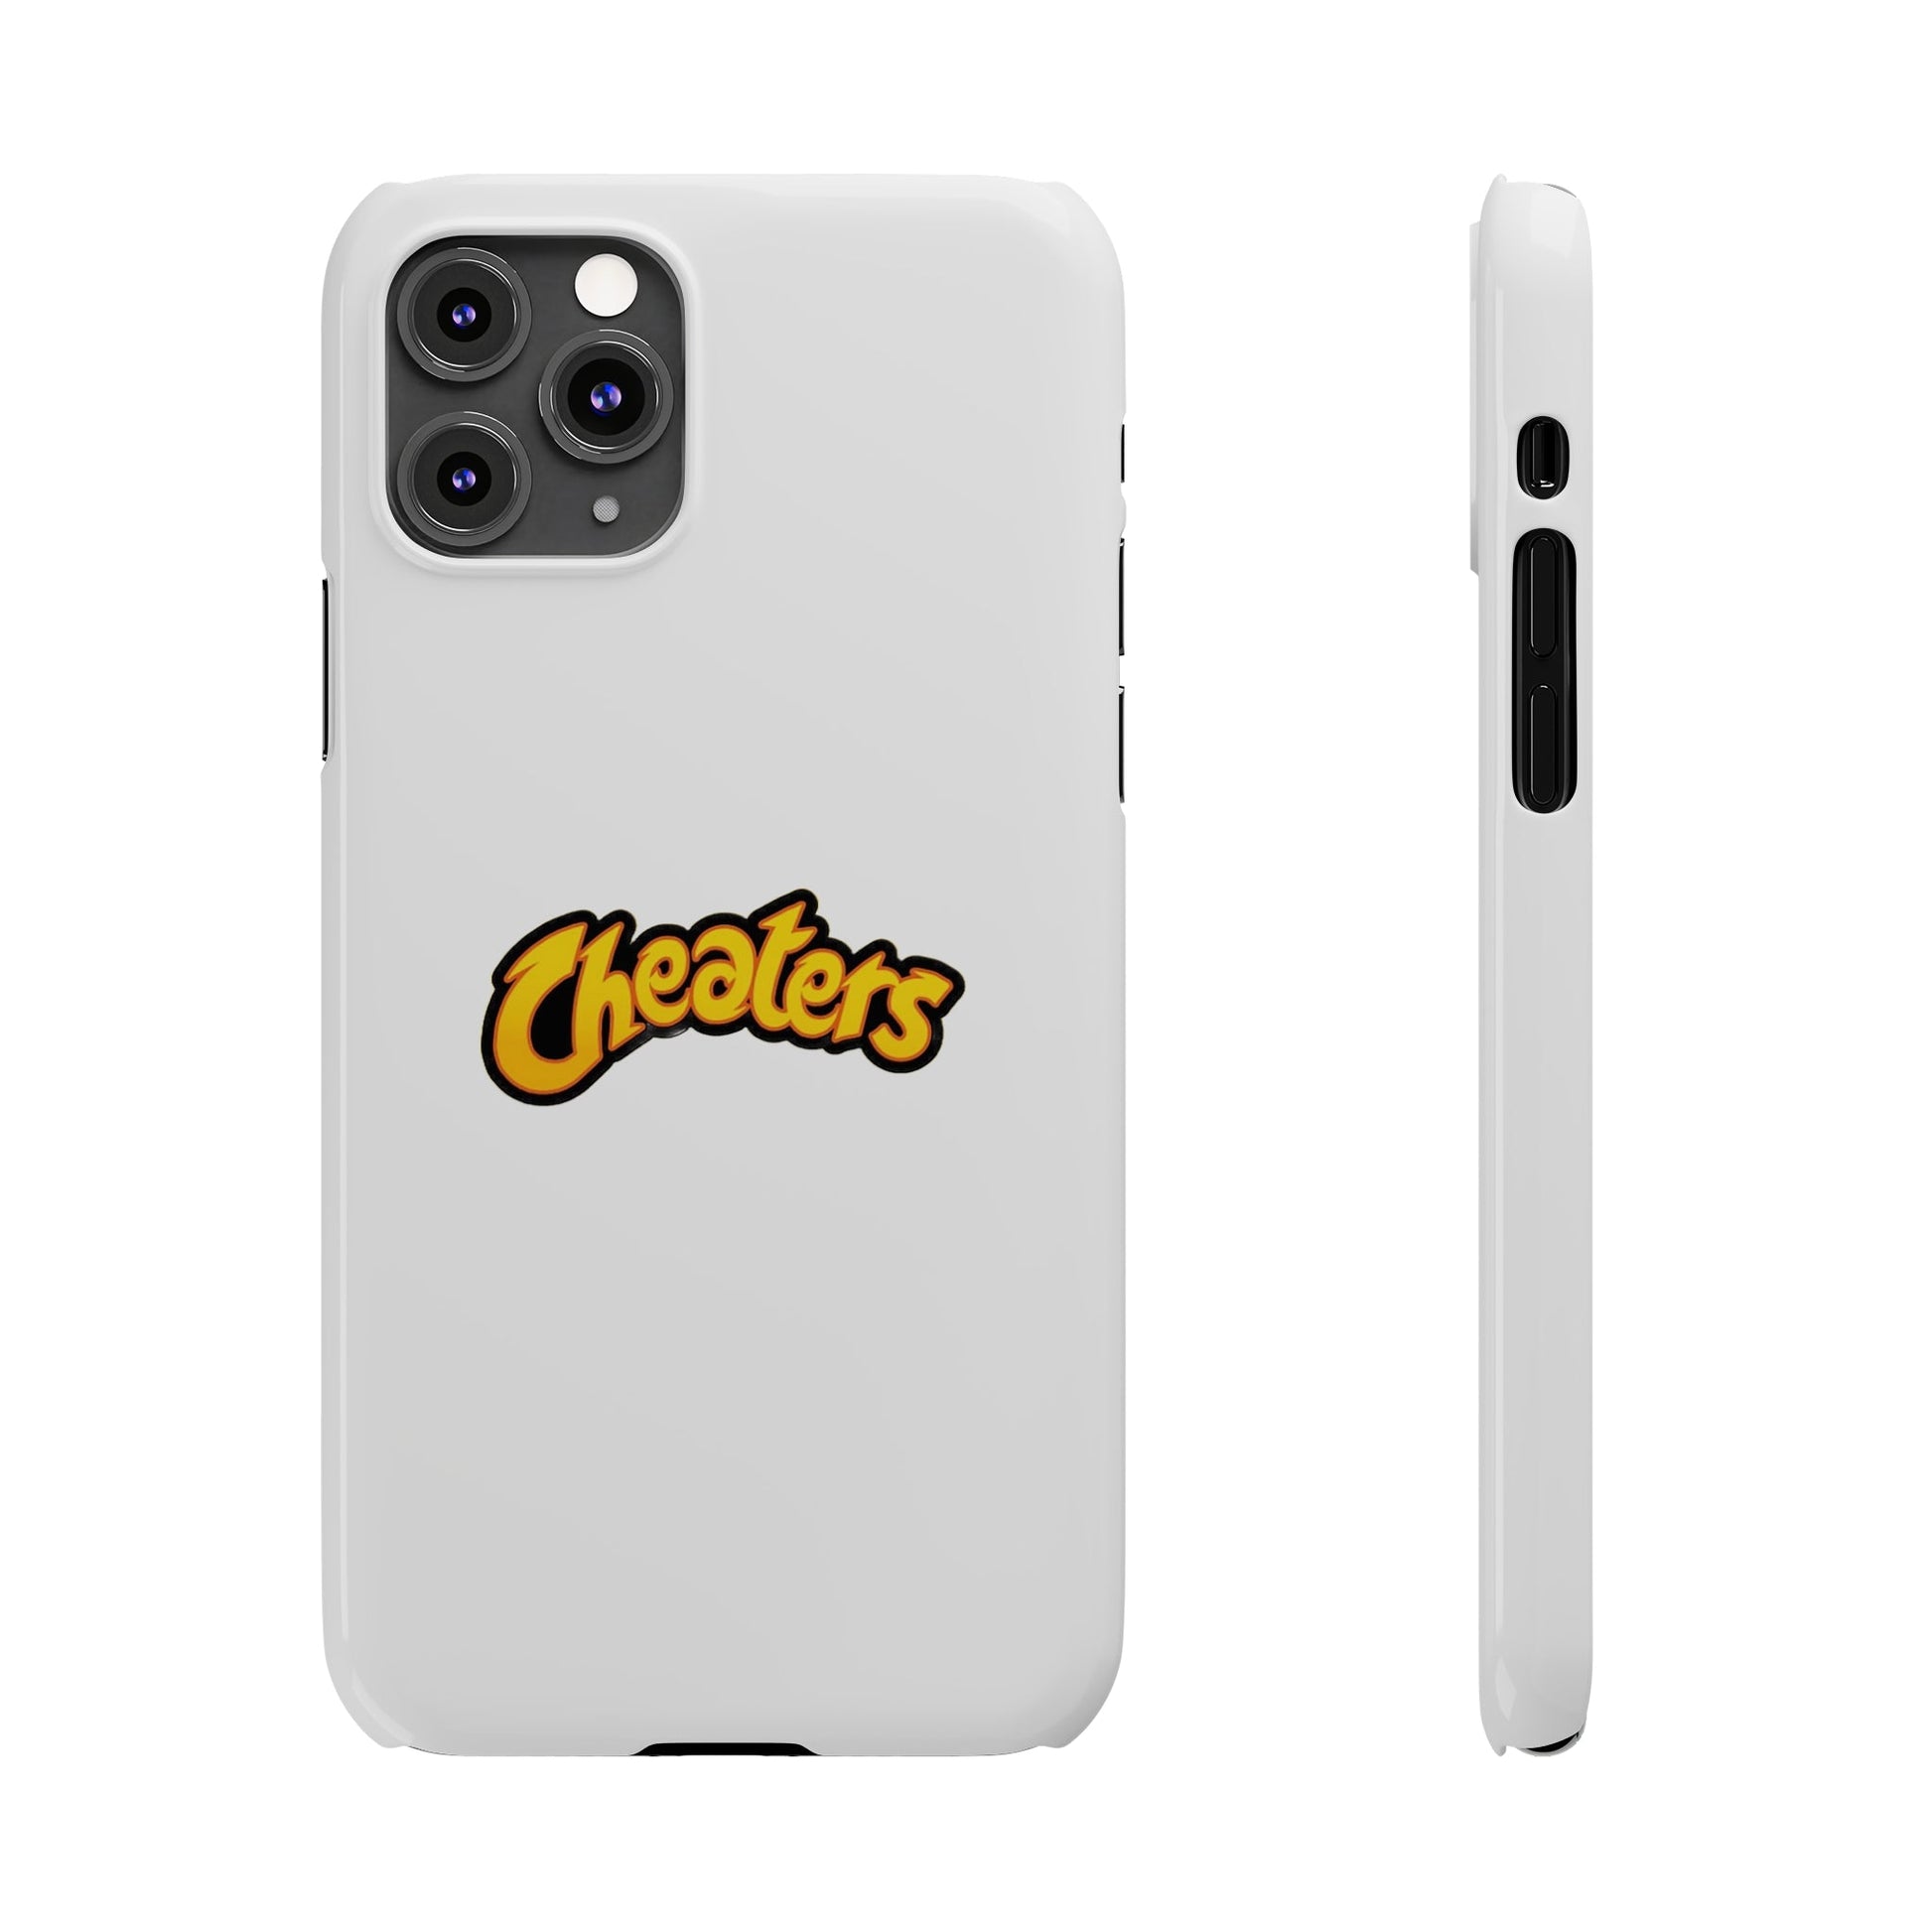 "Cheaters" MagStrong Phone Cases iPhone 11 Pro